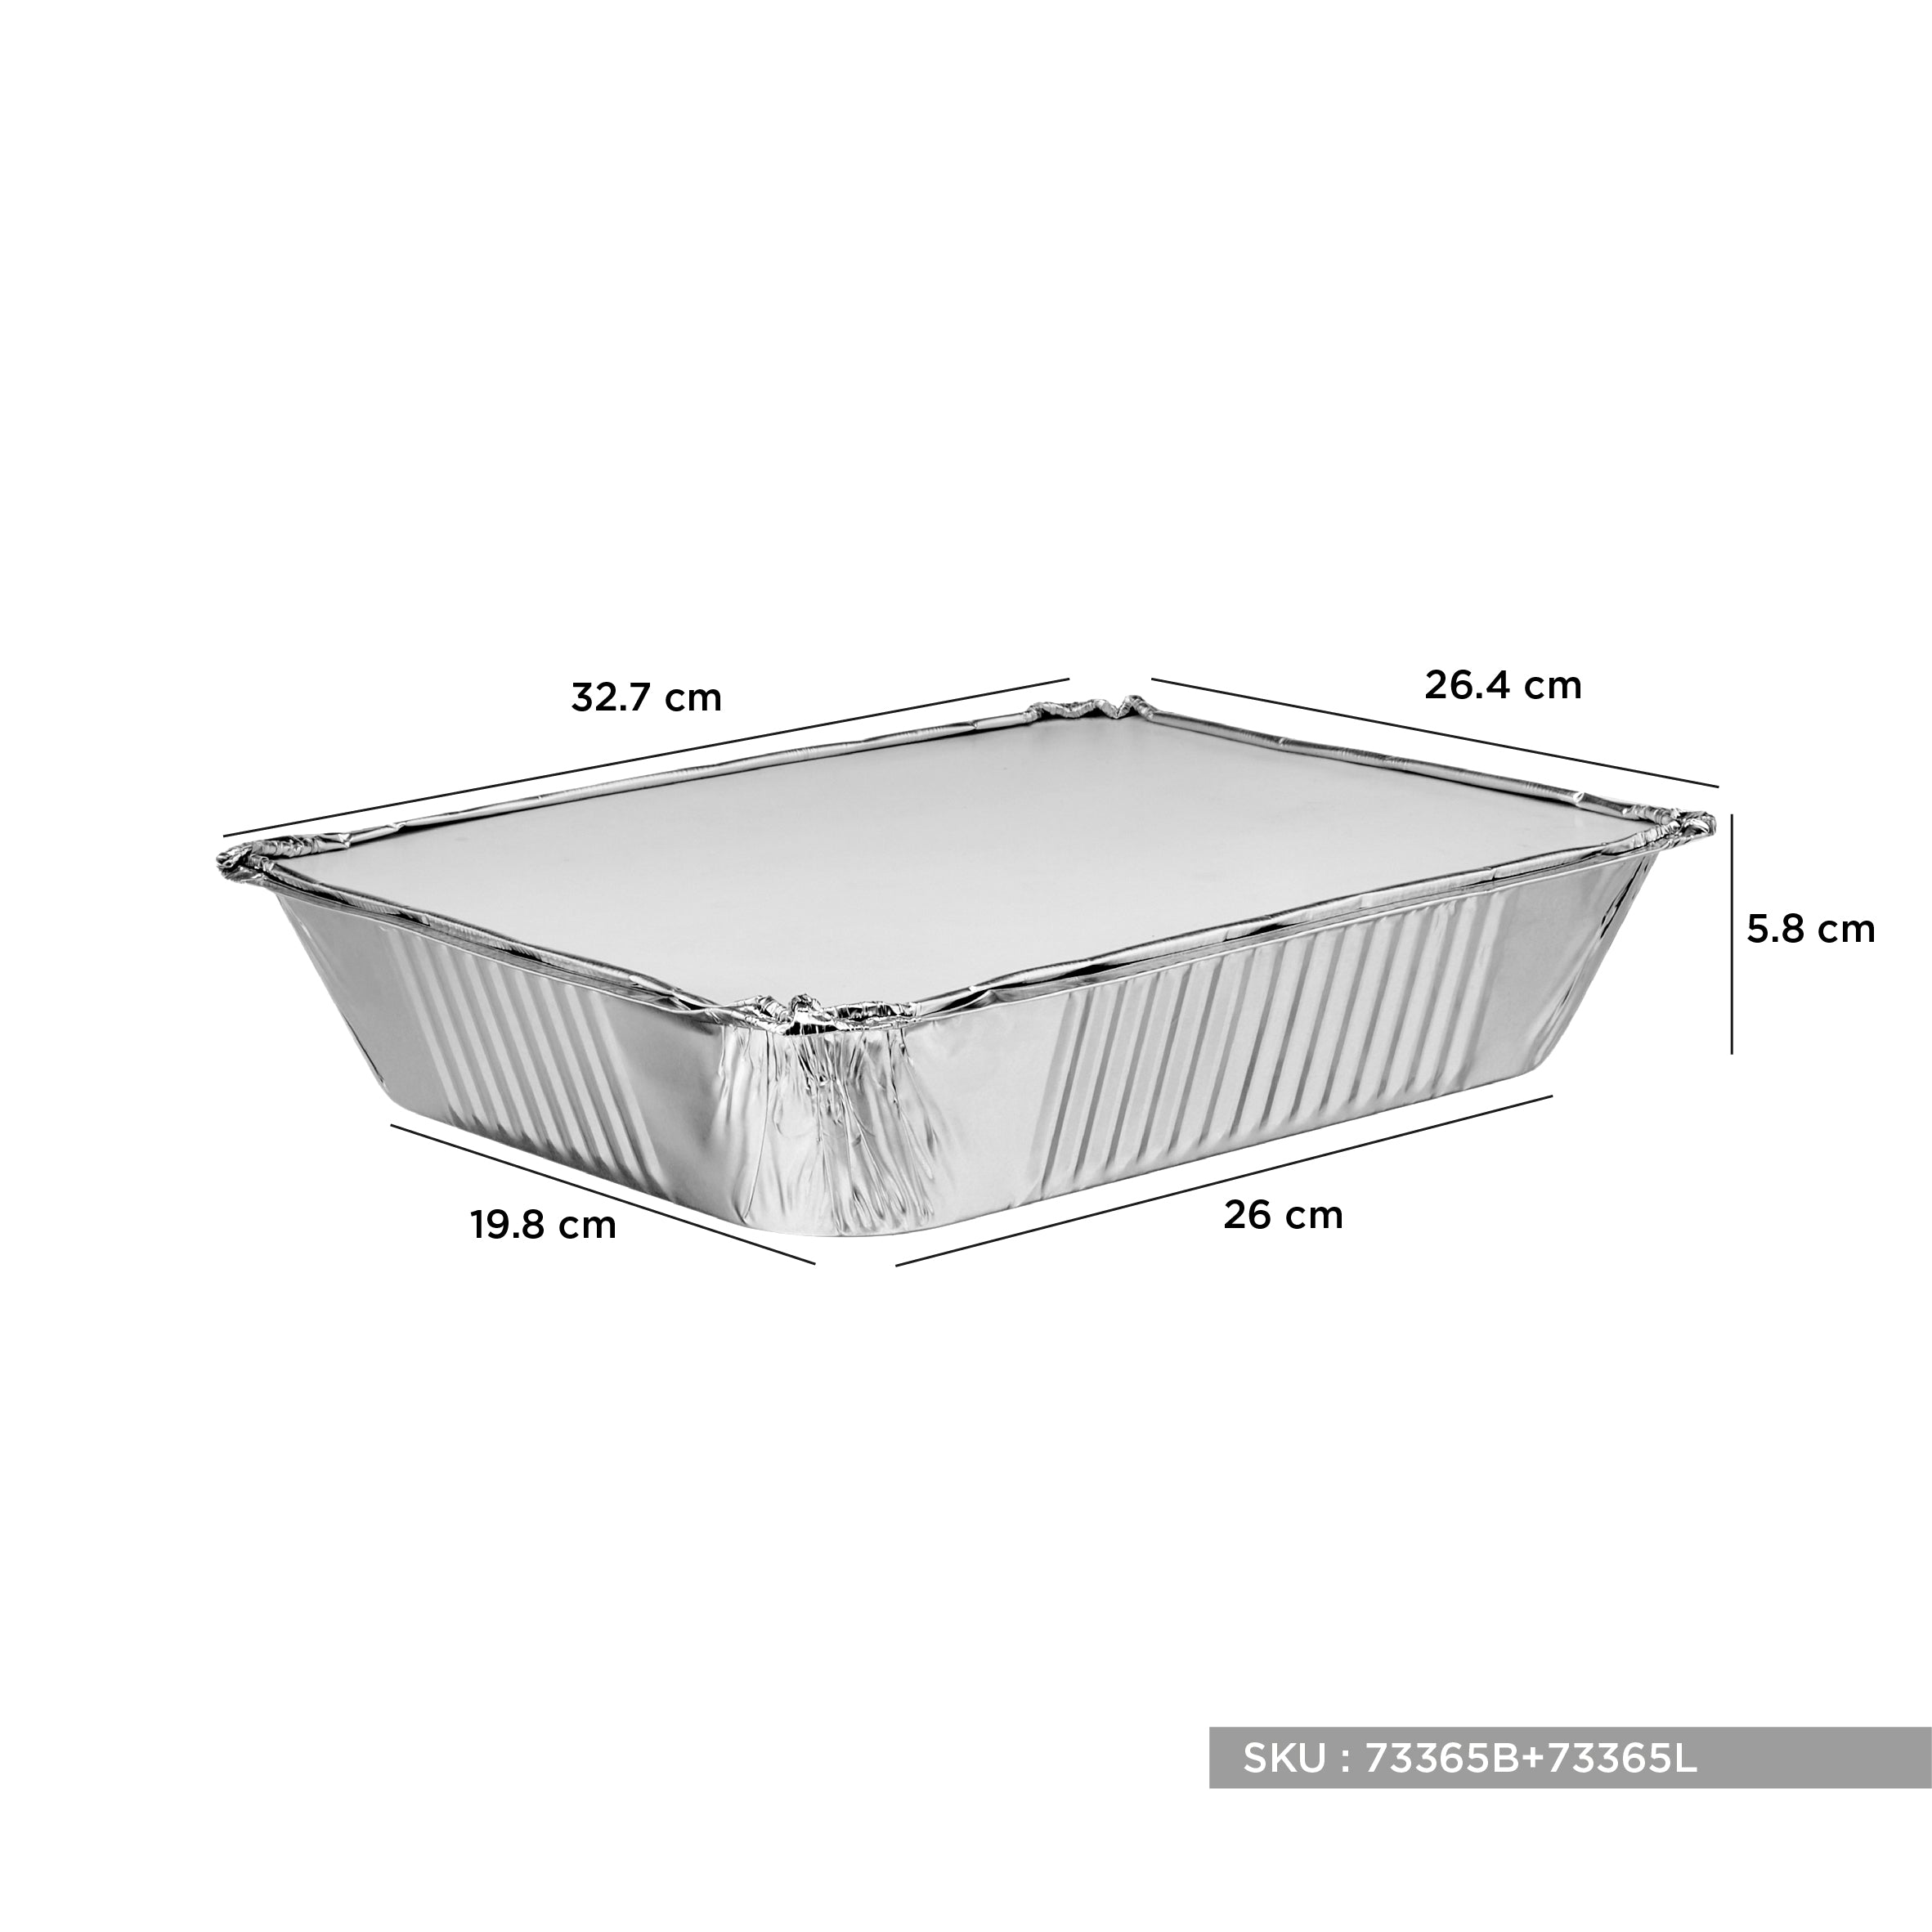 73365 Aluminium food storage container with lid - Hotpack Global